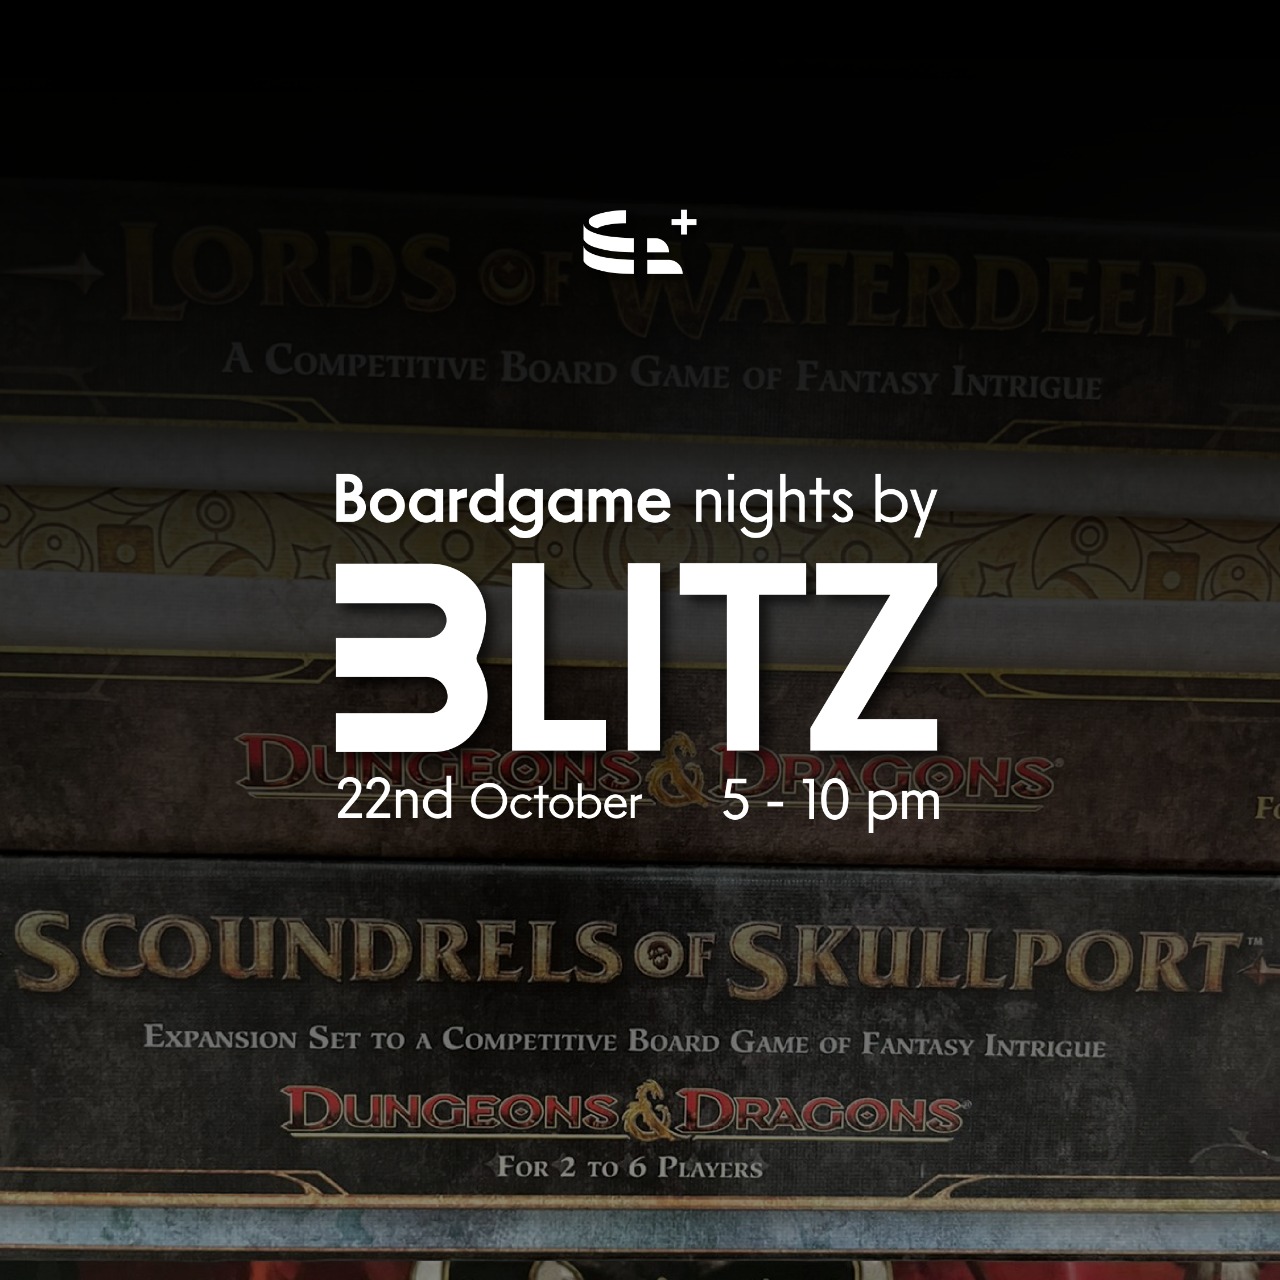 Boardgame nights by Blitz